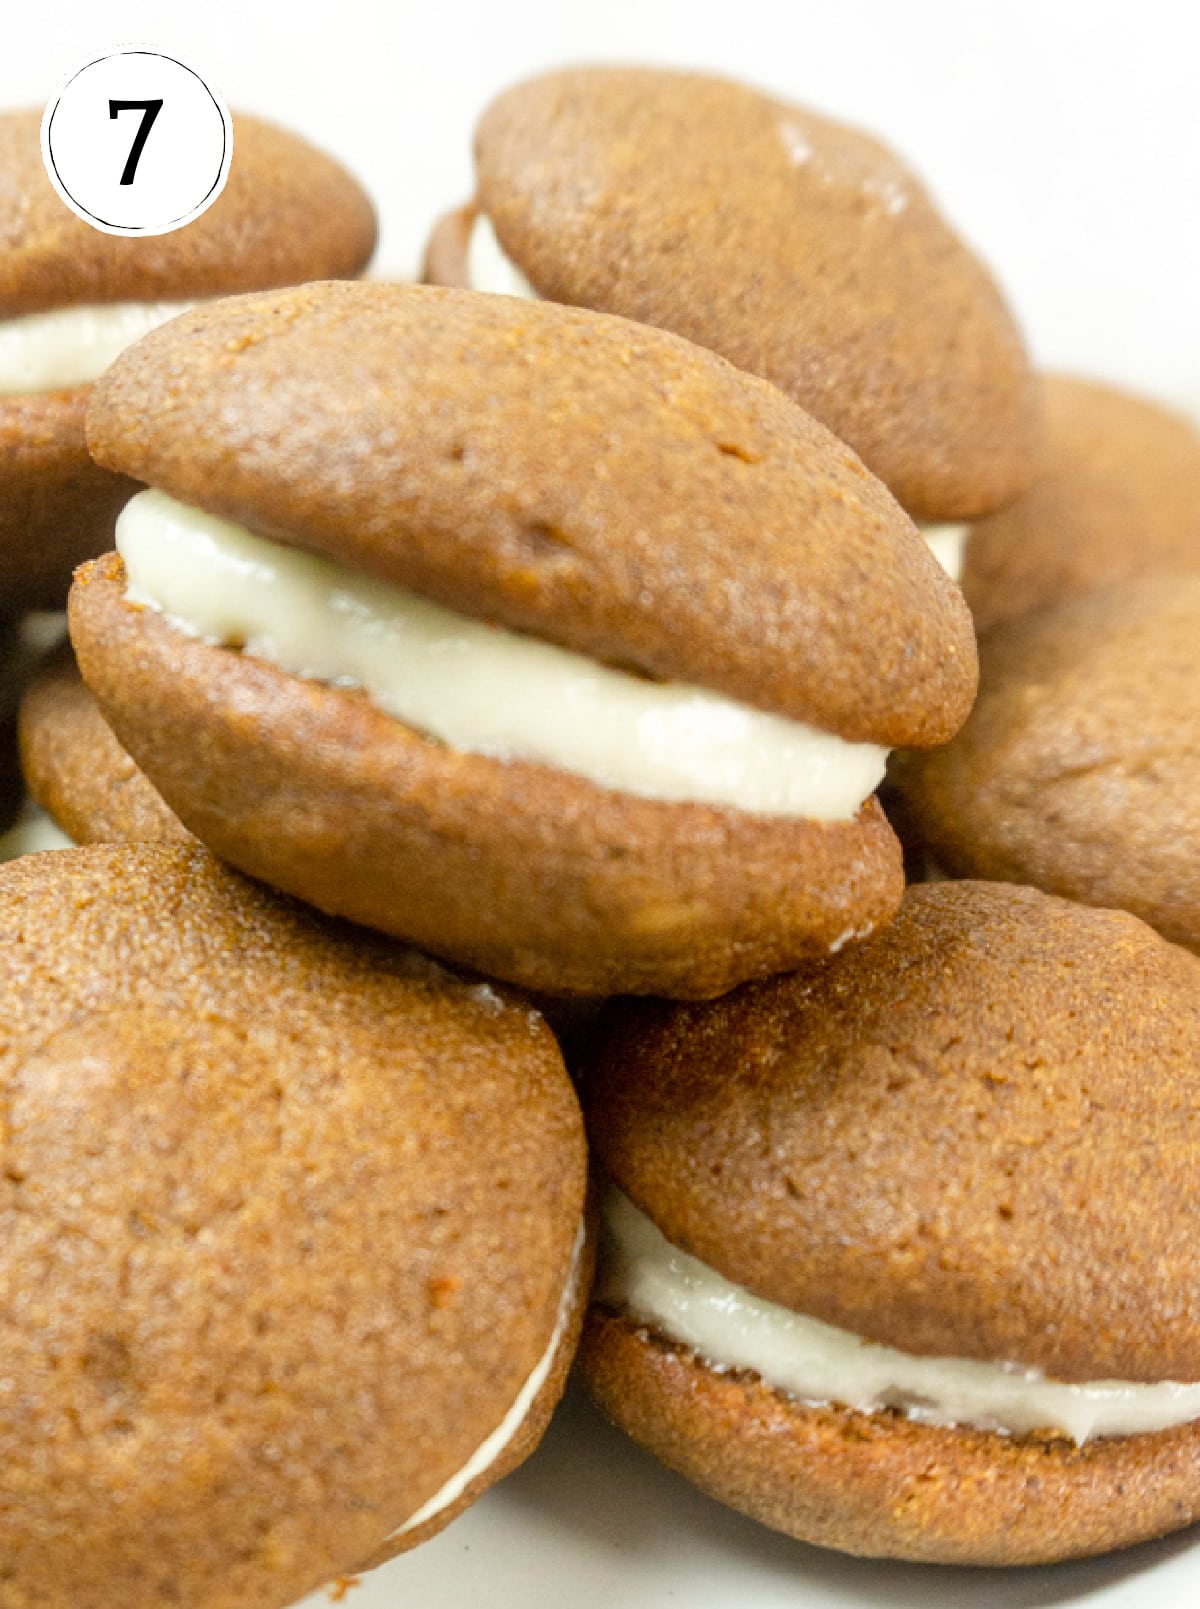 Finished Pumpkin Whoopie Pies.